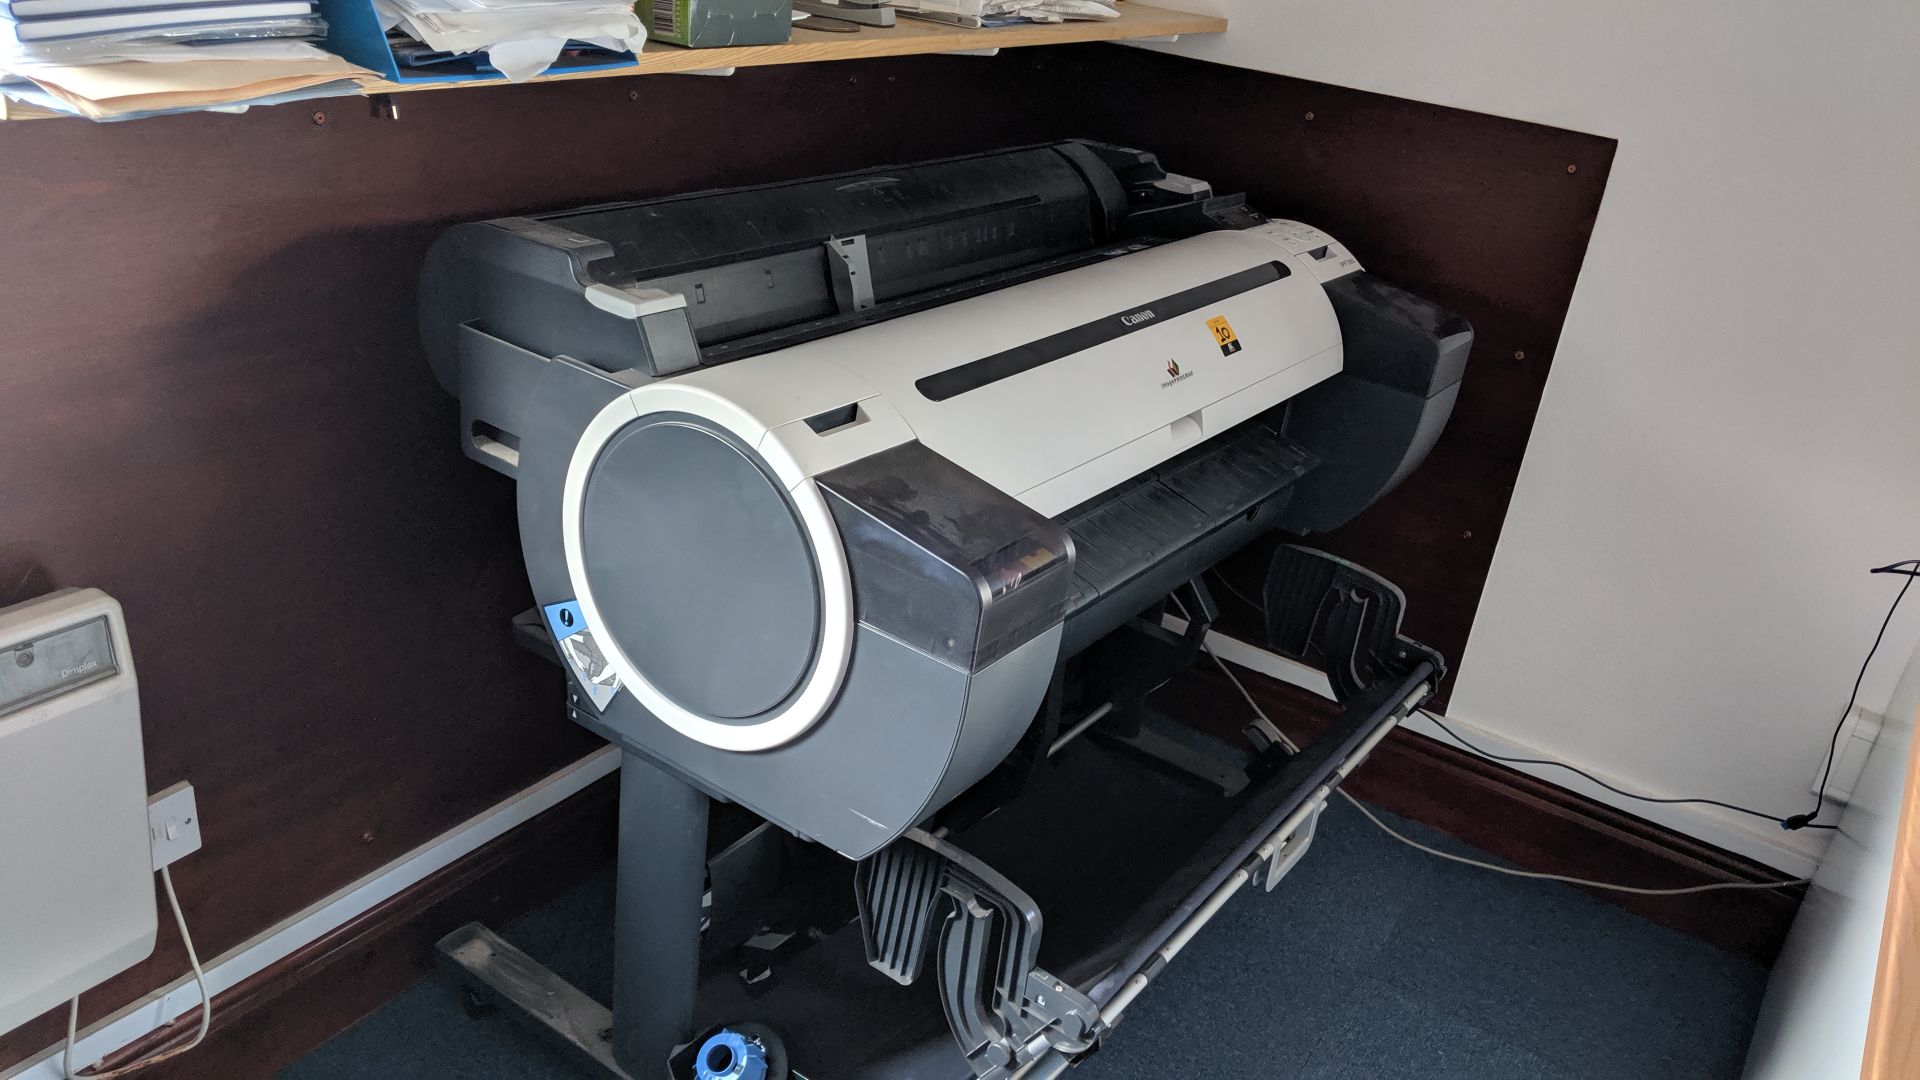 Canon iPF780 wide format printer IMPORTANT: Please remember goods successfully bid upon must be paid - Image 7 of 9